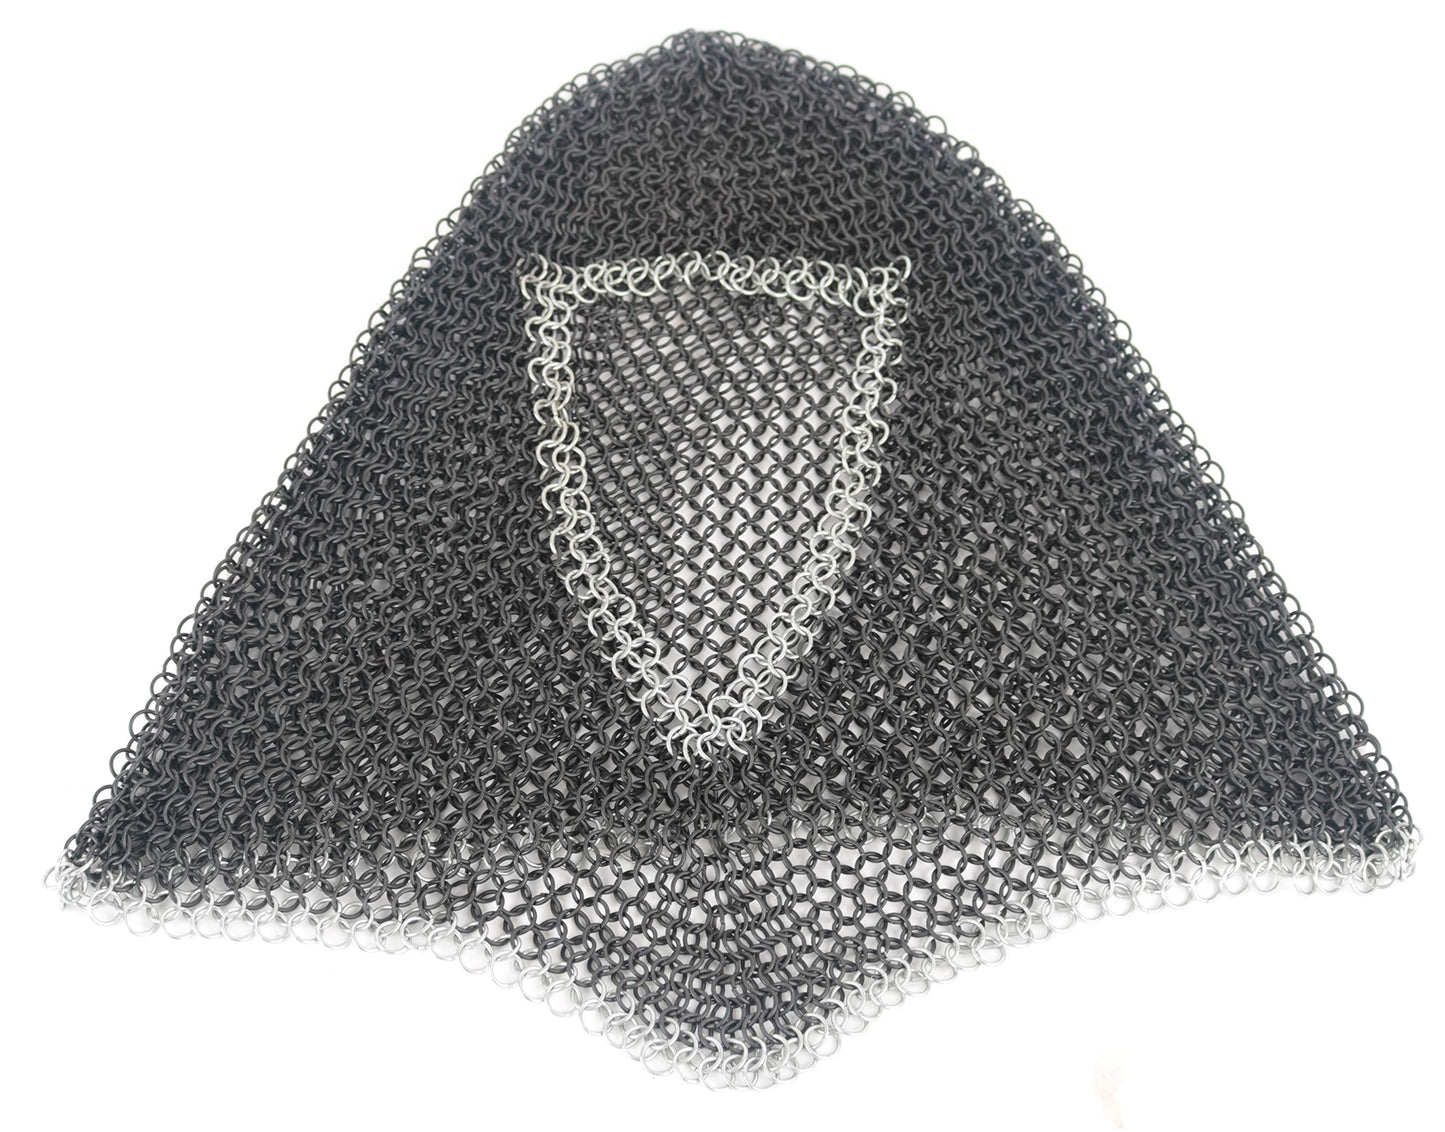 Silver-Wash Chain Mail Coif 16 Gauge